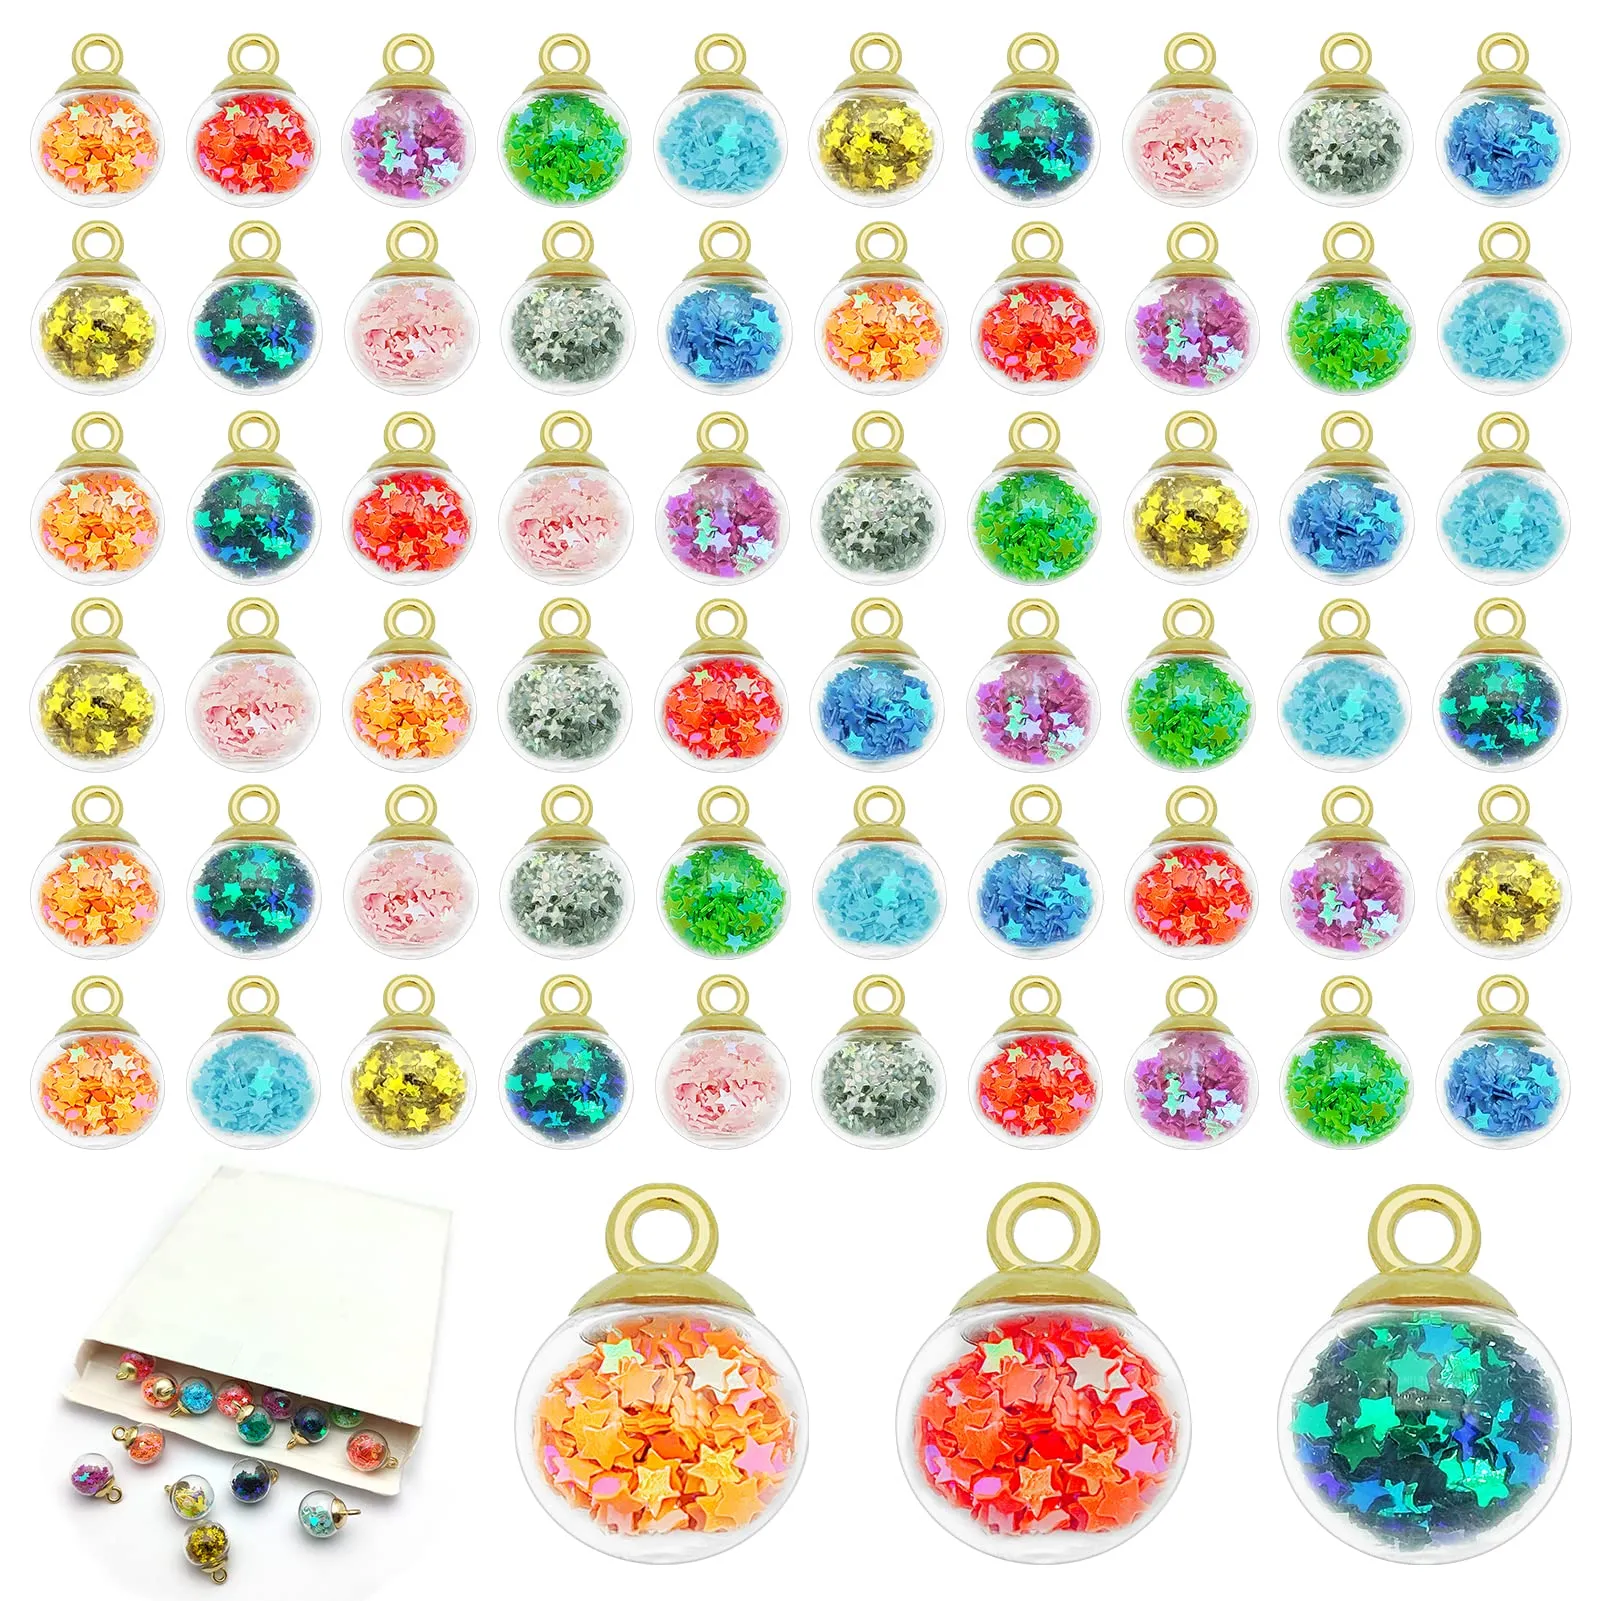 Pendants 16Mm Colorf Glass Ball With Tiny Shiny Star Beads Mixed Crystal Jewelry Making Supplies Pendant Craft Accessory For Di Mjbag Amyoh